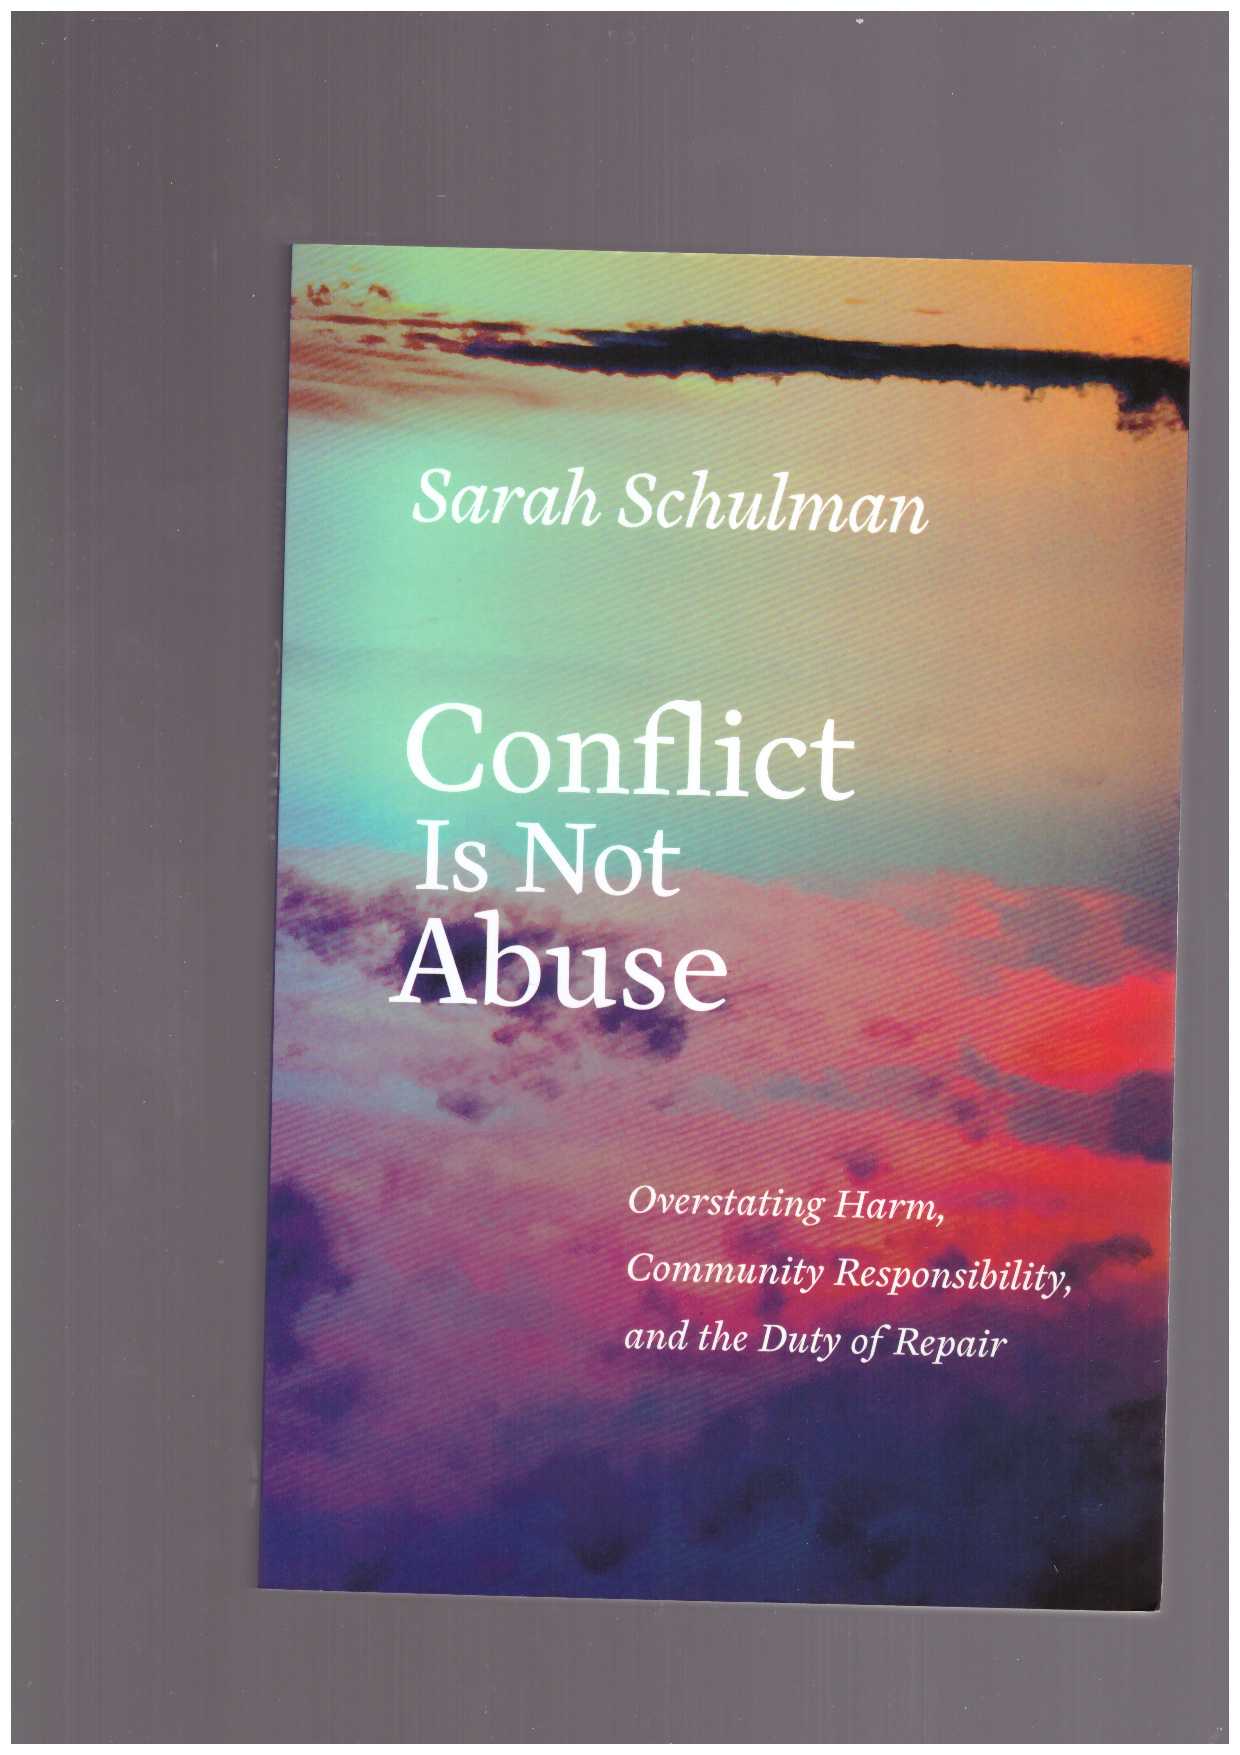 SCHULMAN, Sarah - Conflict is not abuse